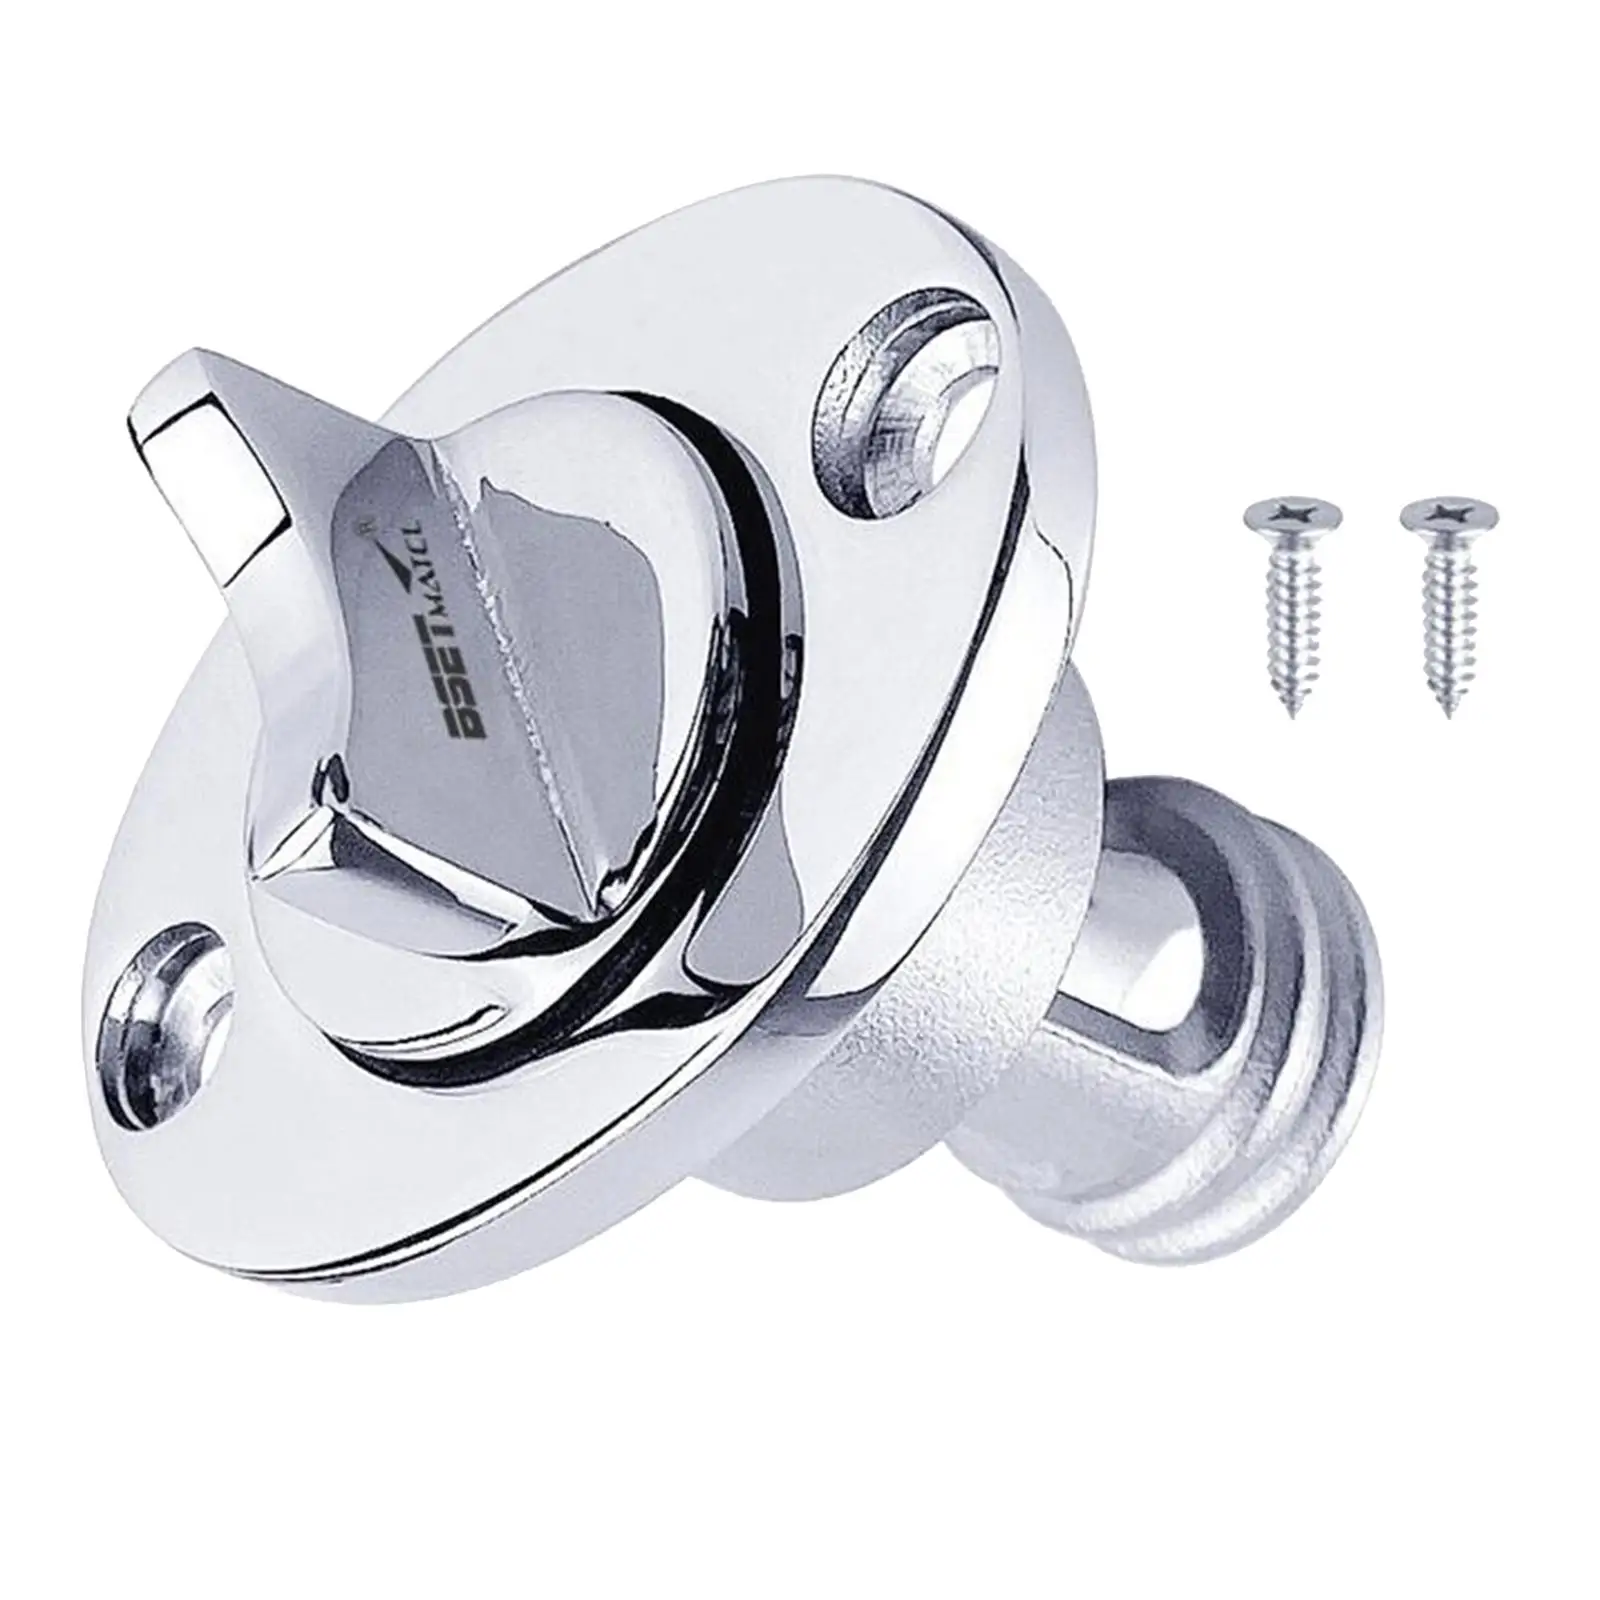 Stainless Steel  Stern Stern Hardware Accessories   Drain Plug for